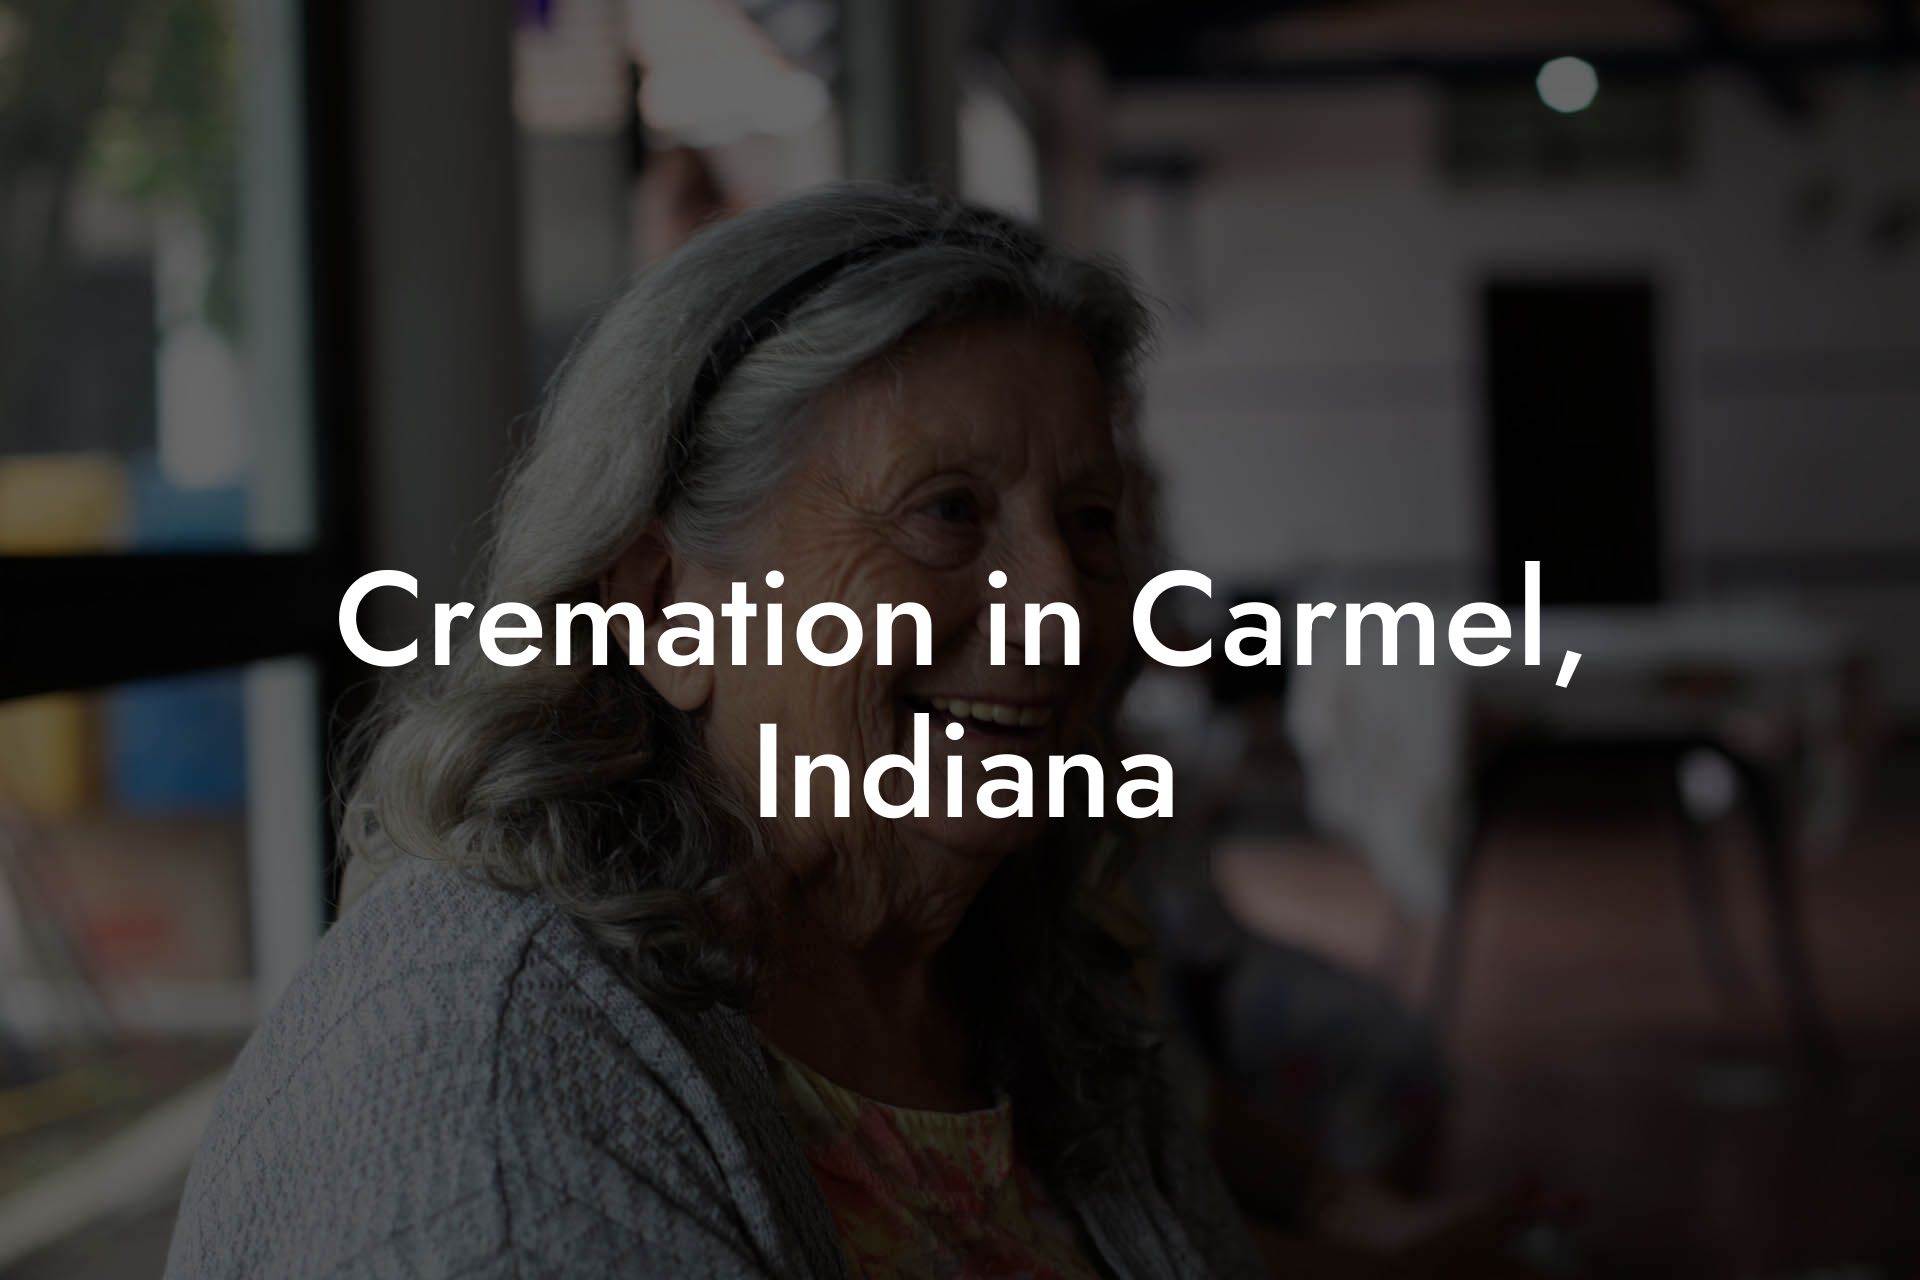 Cremation in Carmel, Indiana